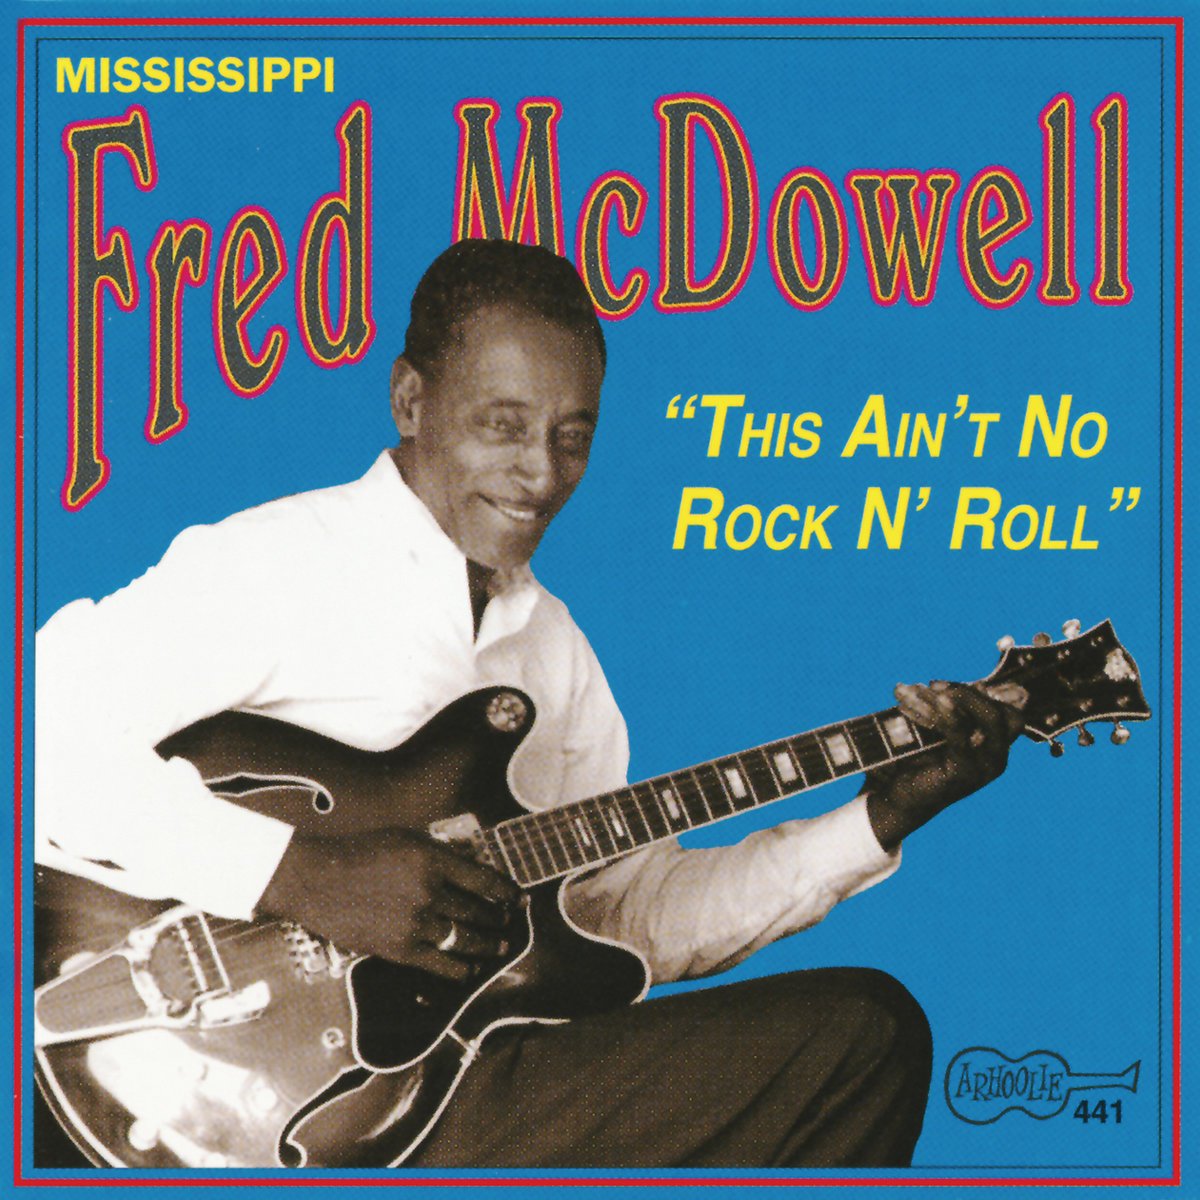 Mississippi Fred Mcdowell-This Aint No Rock N Roll-(CD-441)-Reissue-CD-FLAC-1995-6DM